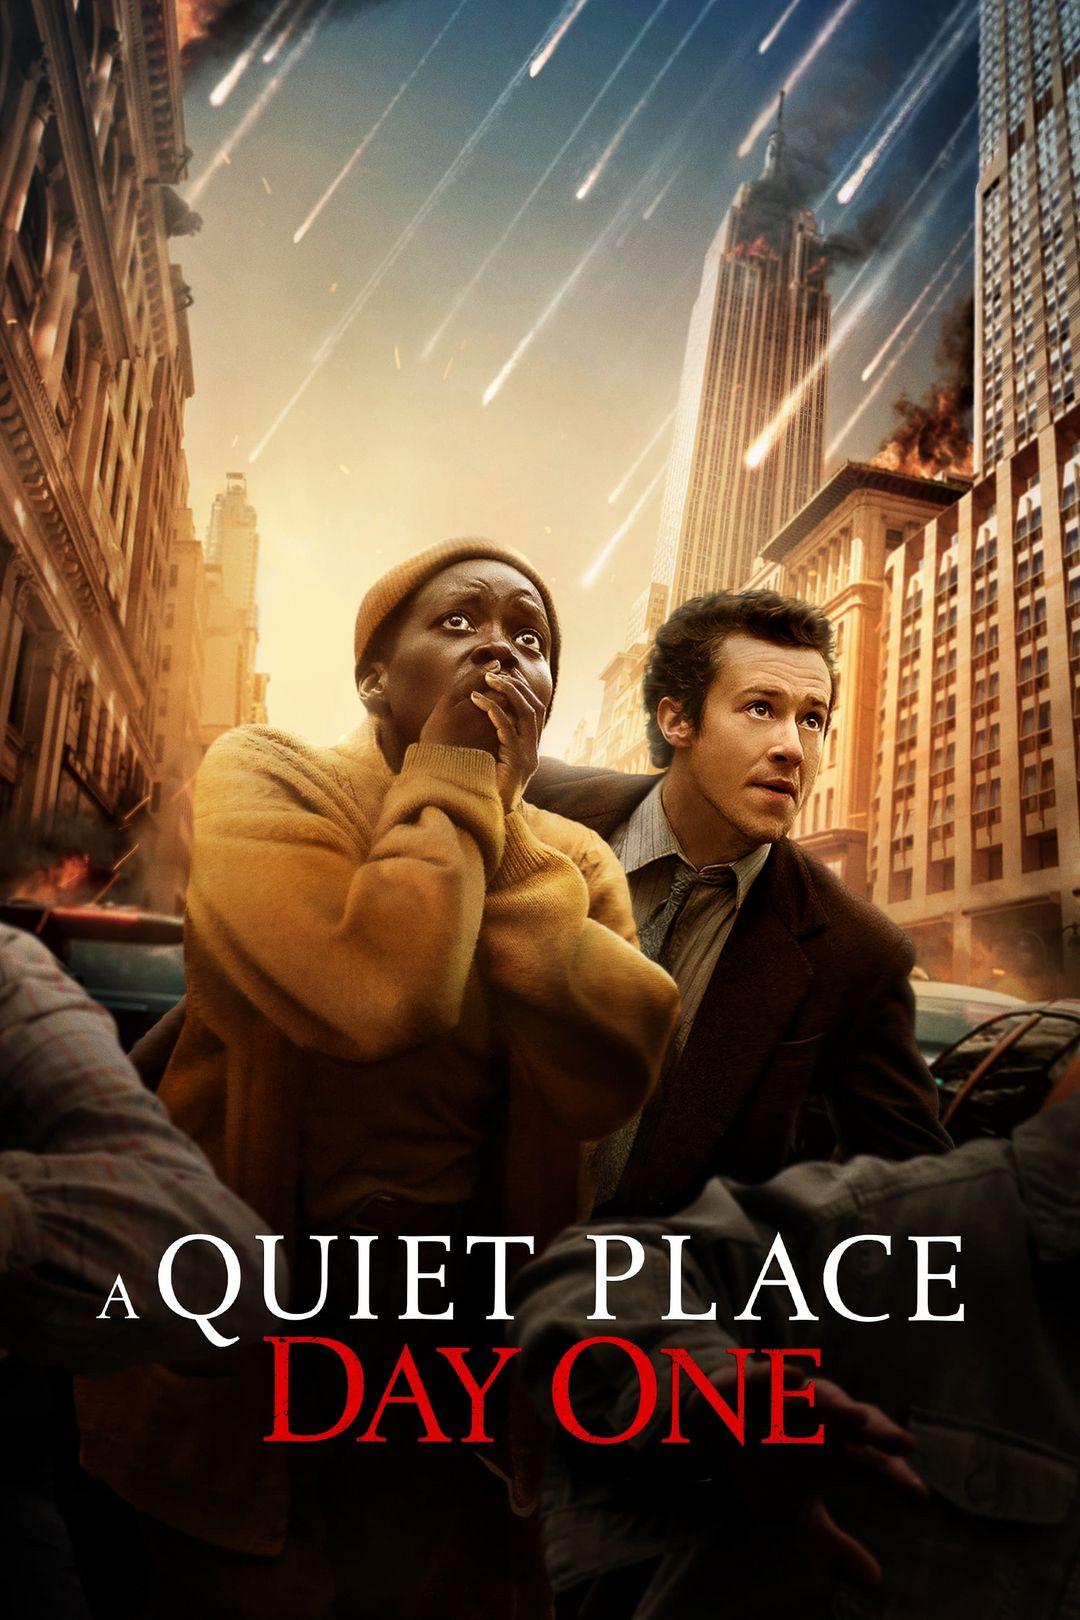 A Quiet Place: Day One's poster